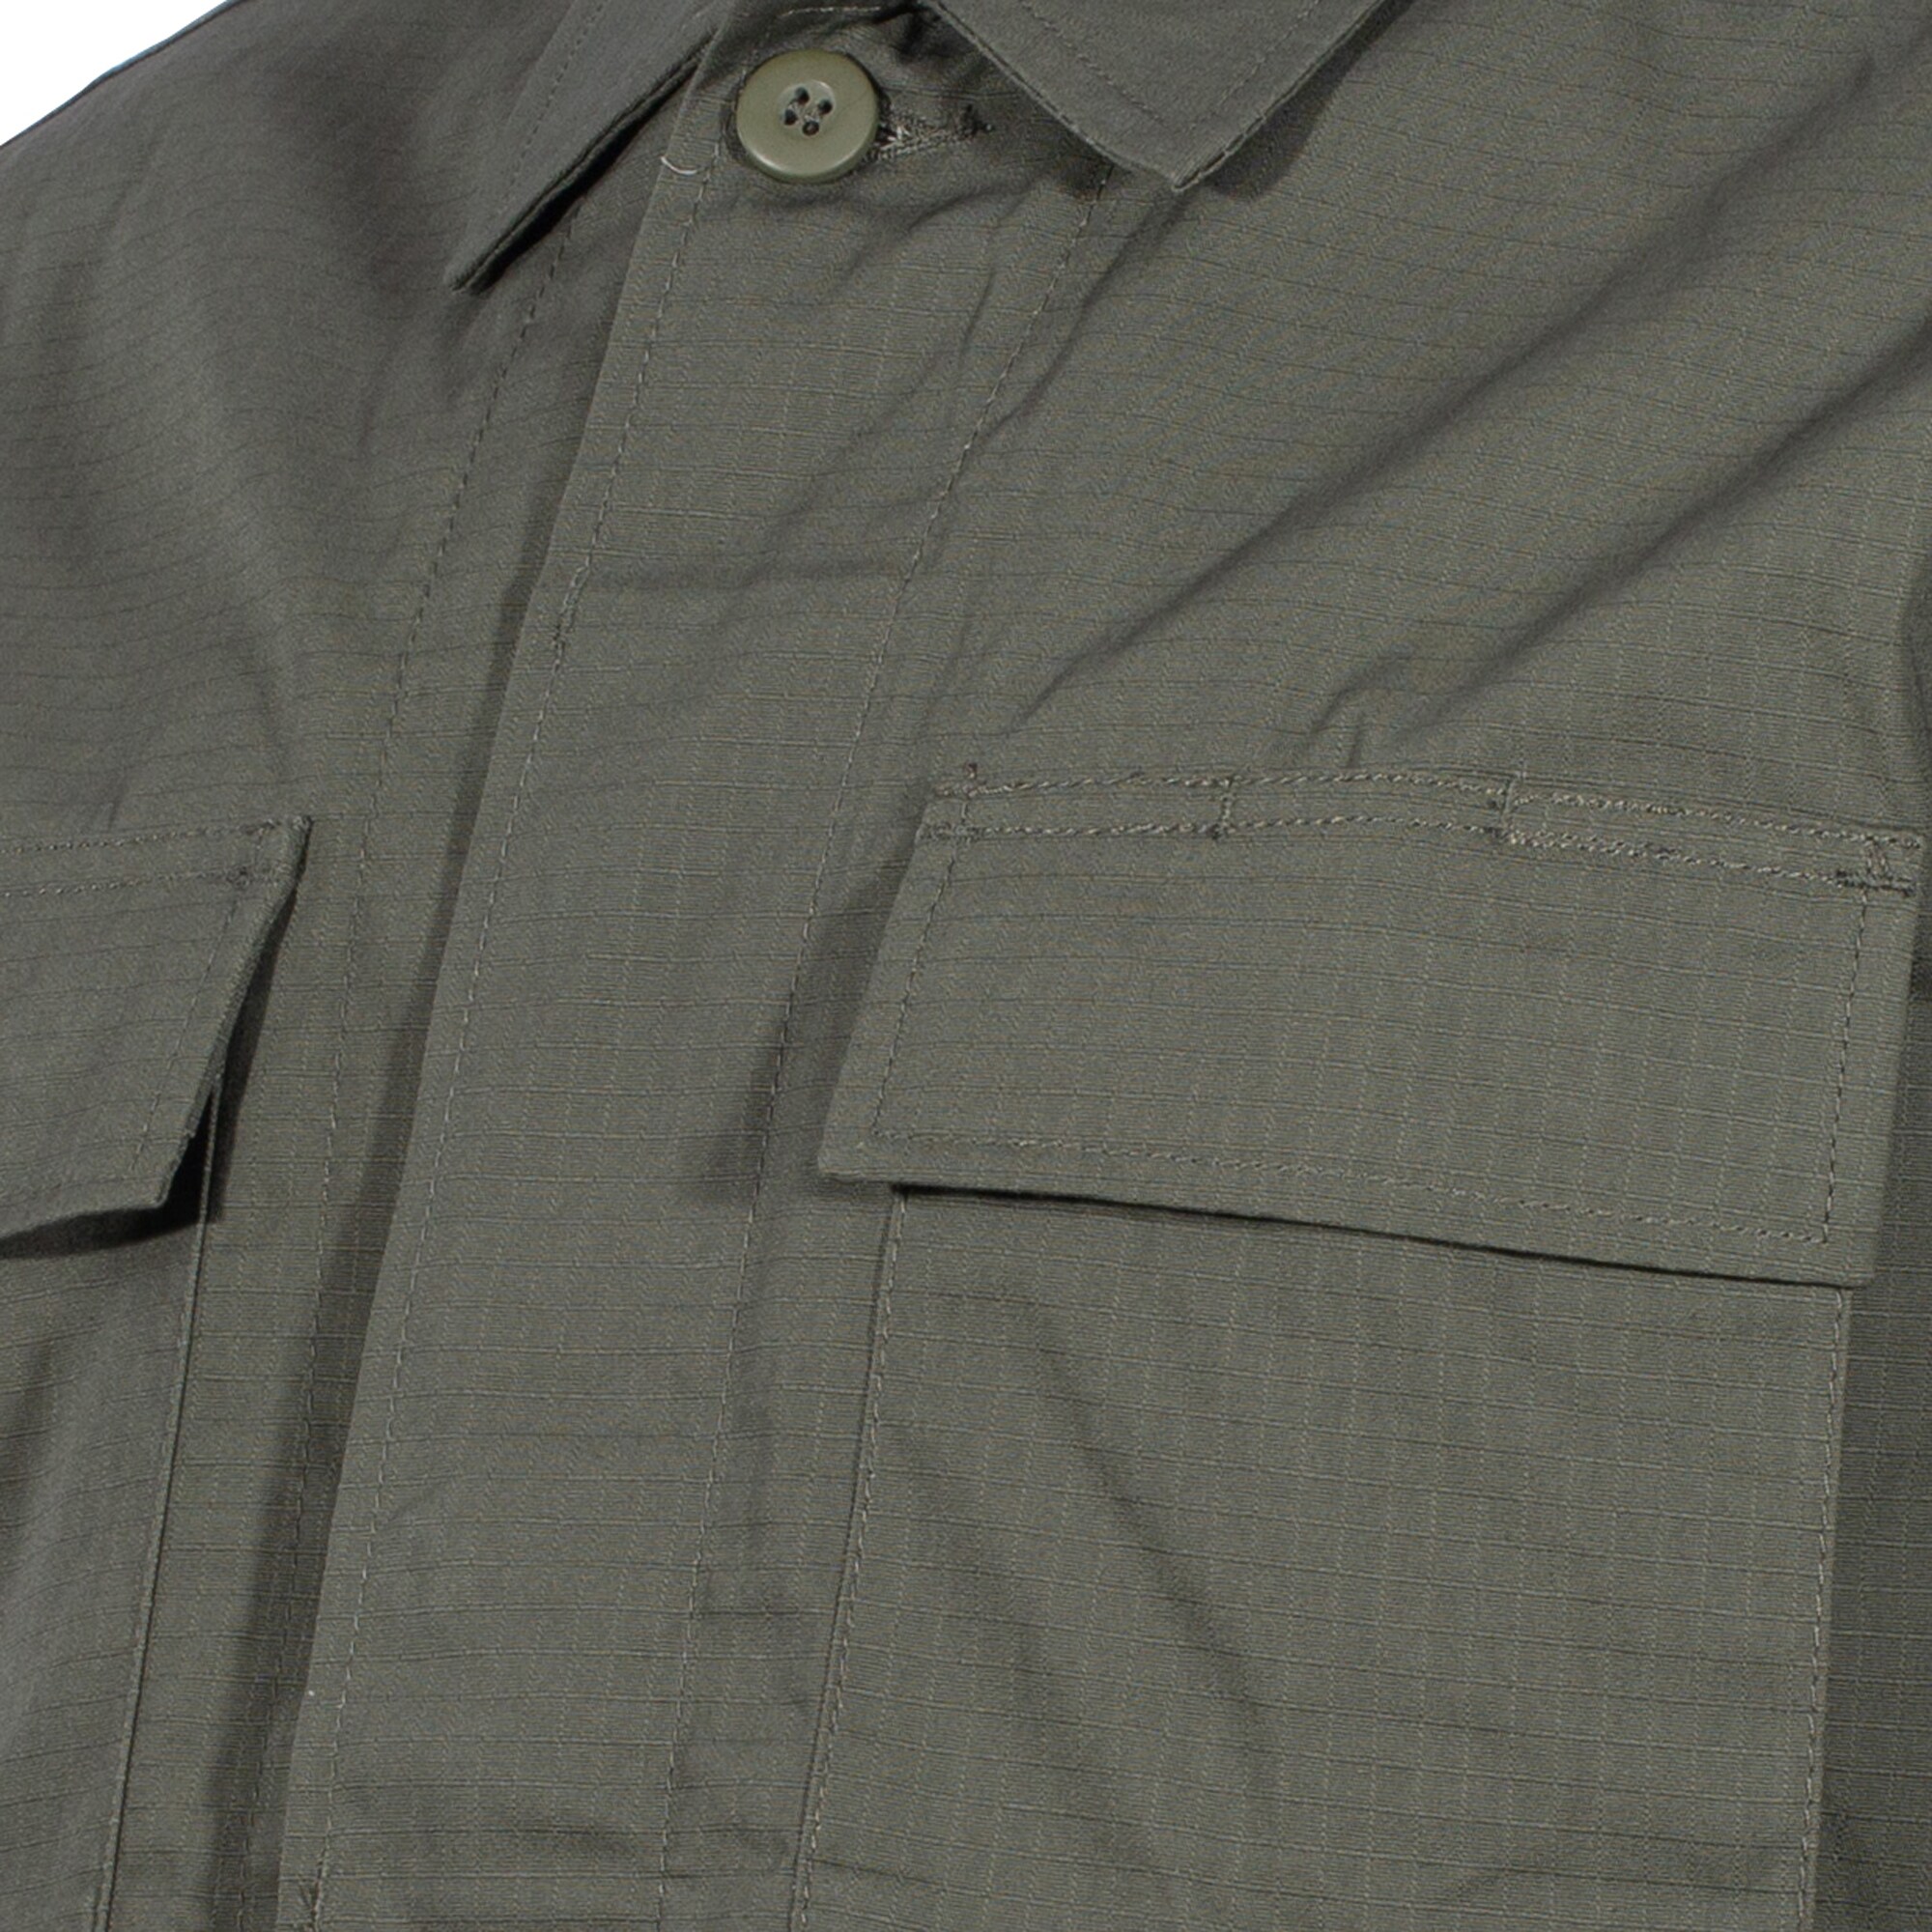 Purchase the Mil-Tec US BDU Blouse olive by ASMC